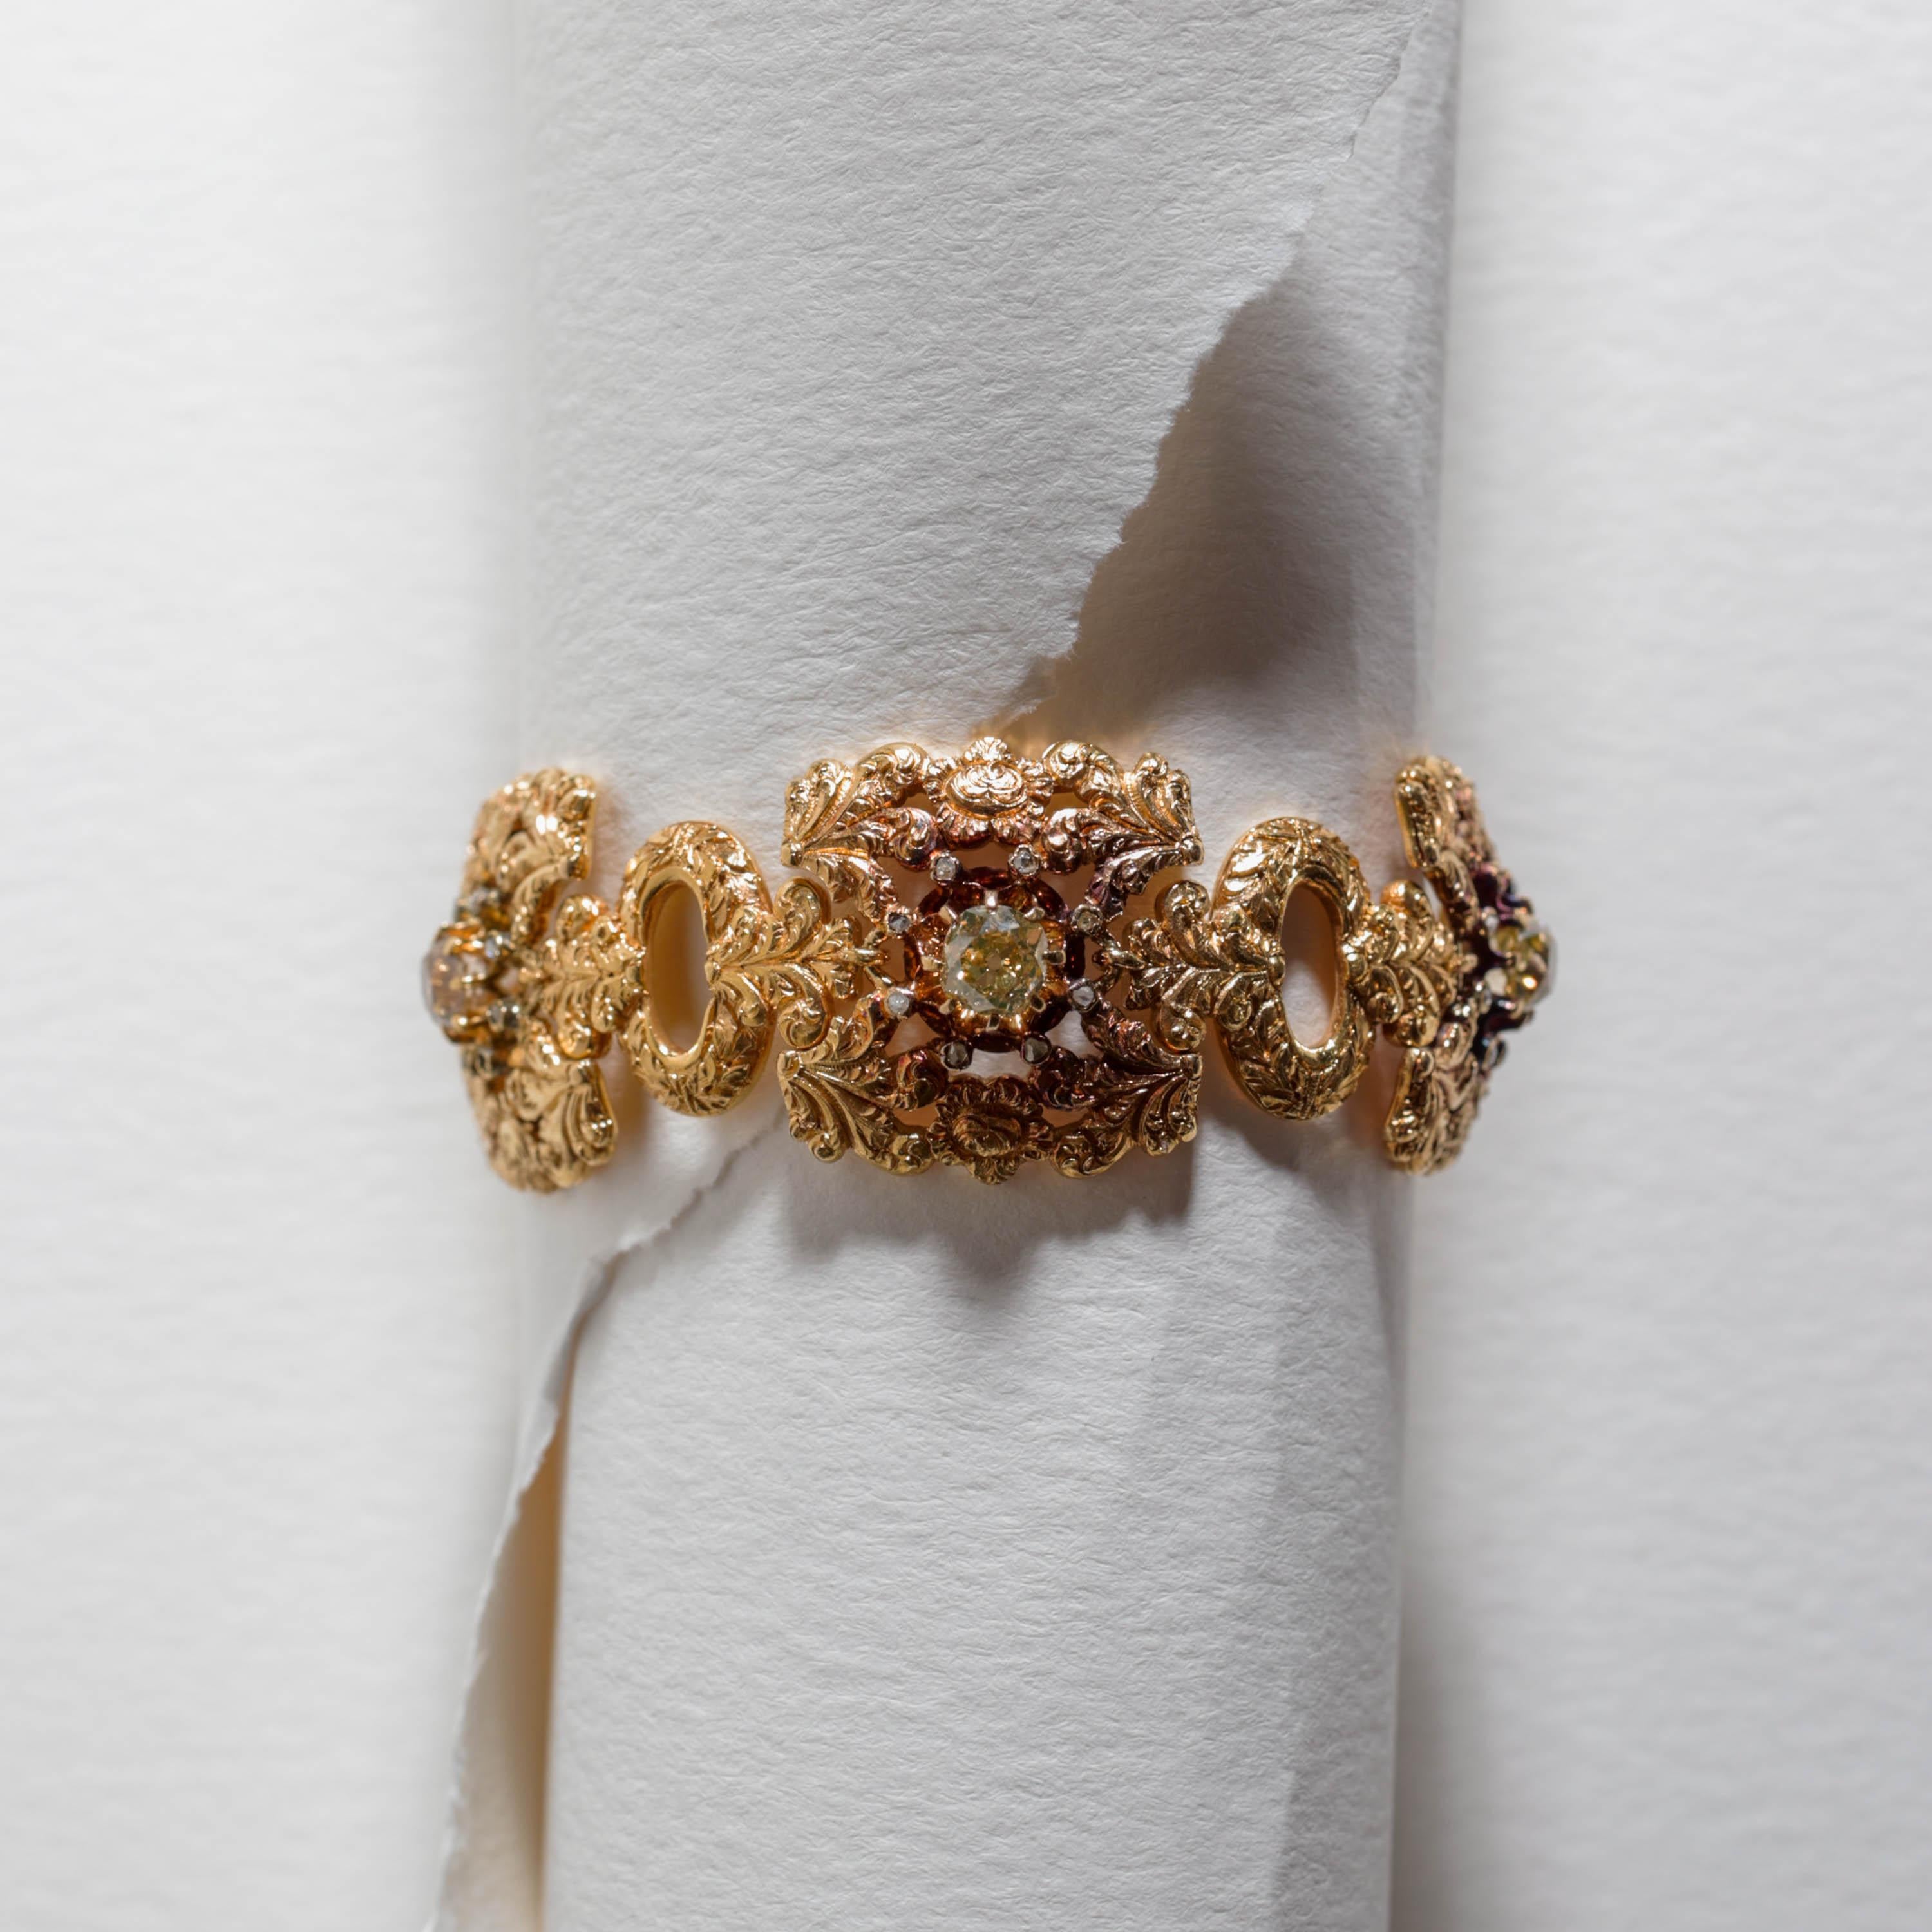 Buccellati Suite Created by Mario Buccellati Himself, $450k Official Evaluation  For Sale 6